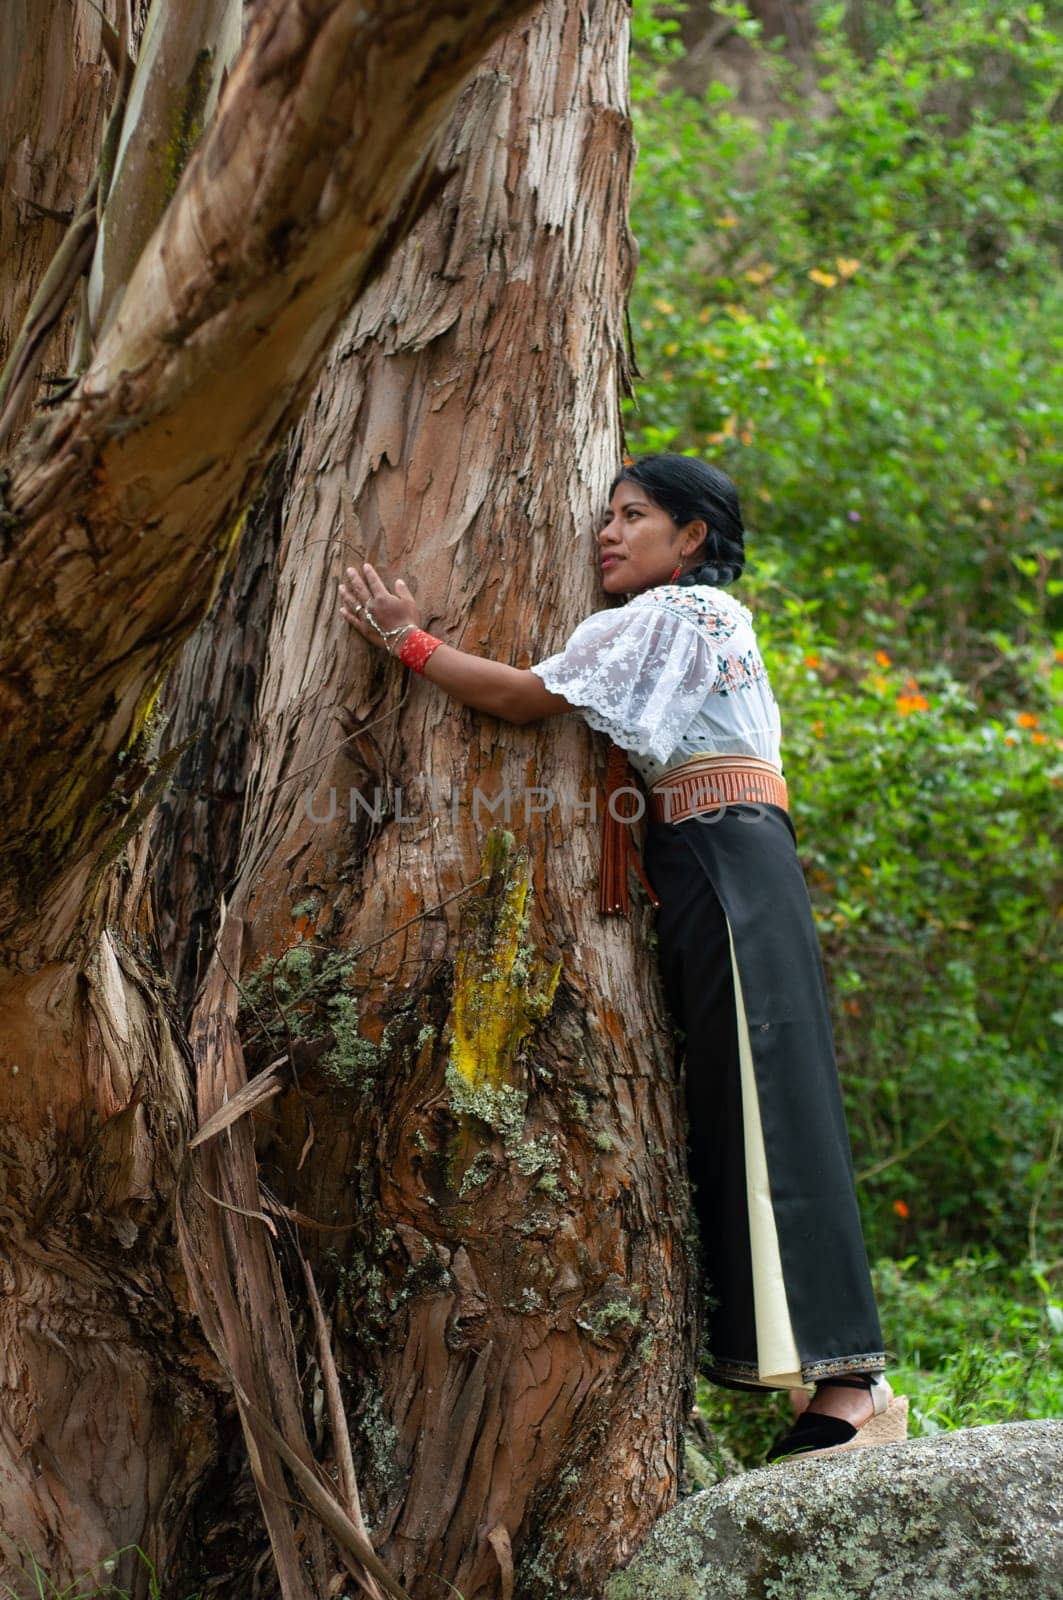 indigenous environmentalist embracing an ancient tree in a moment of spiritual connection and vitality.EARTH DAY by Raulmartin